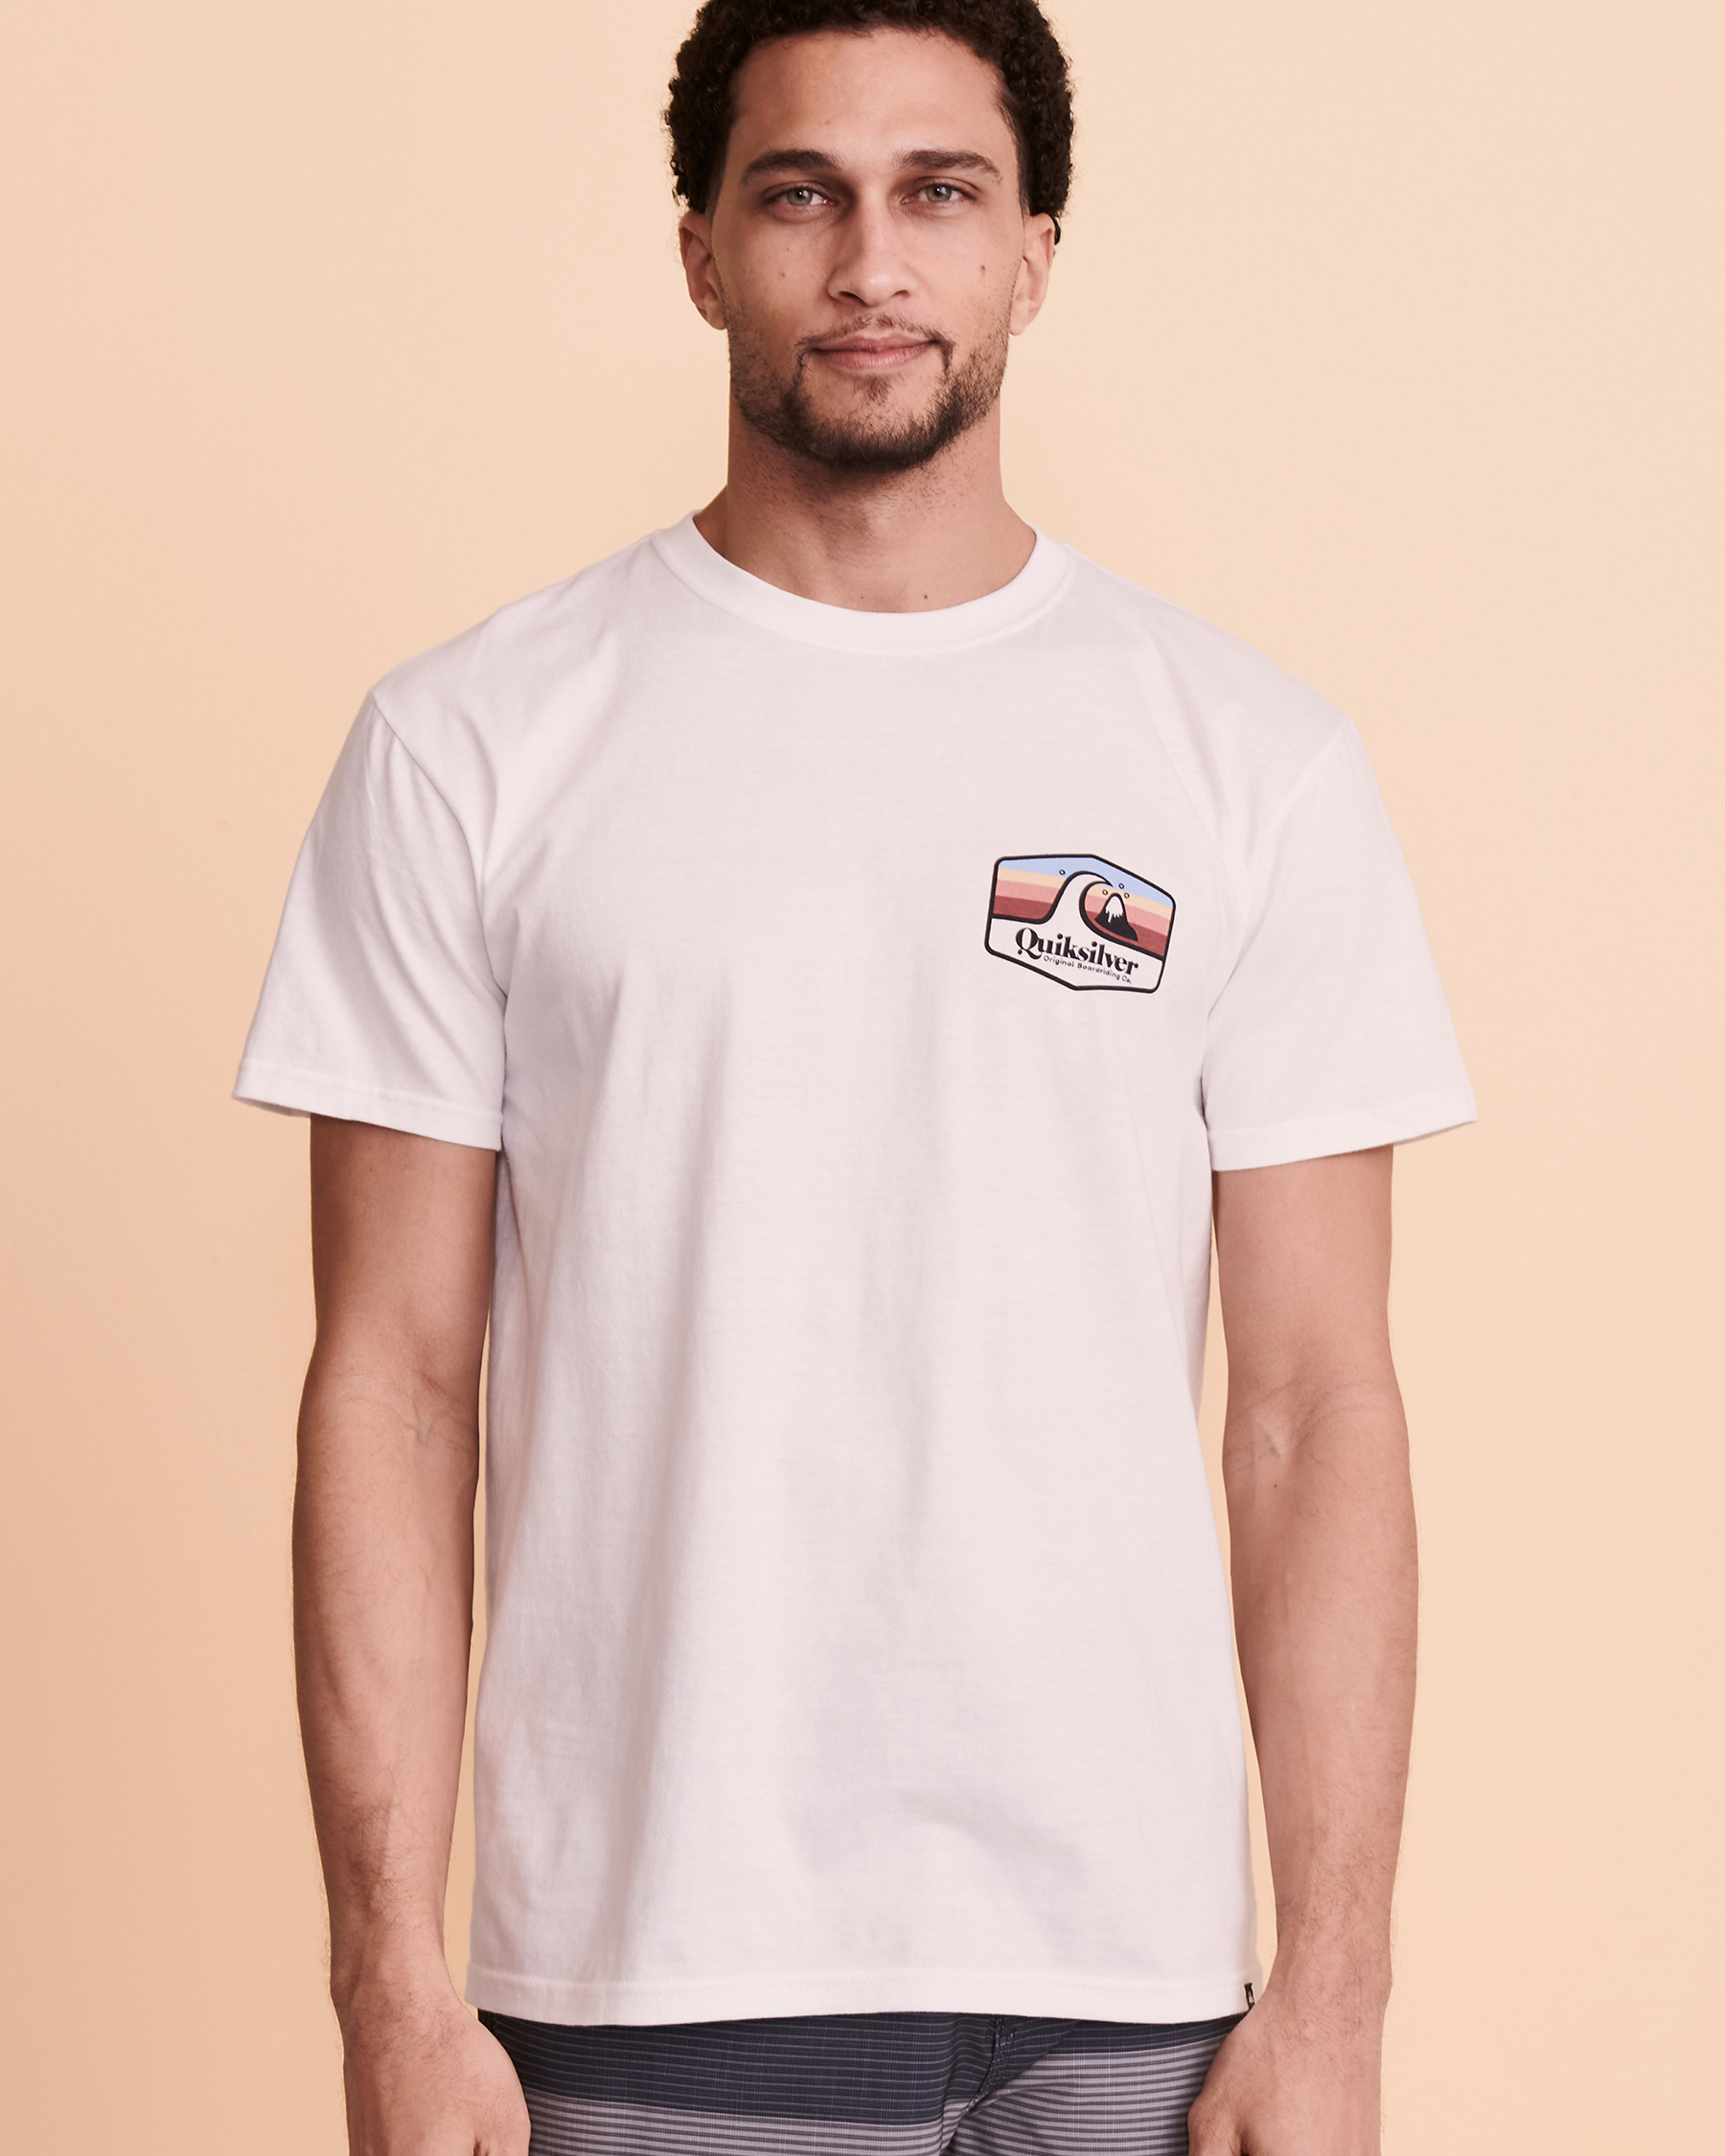 QUIKSILVER TOWN HALL T-shirt White AQYZT08050 - View1